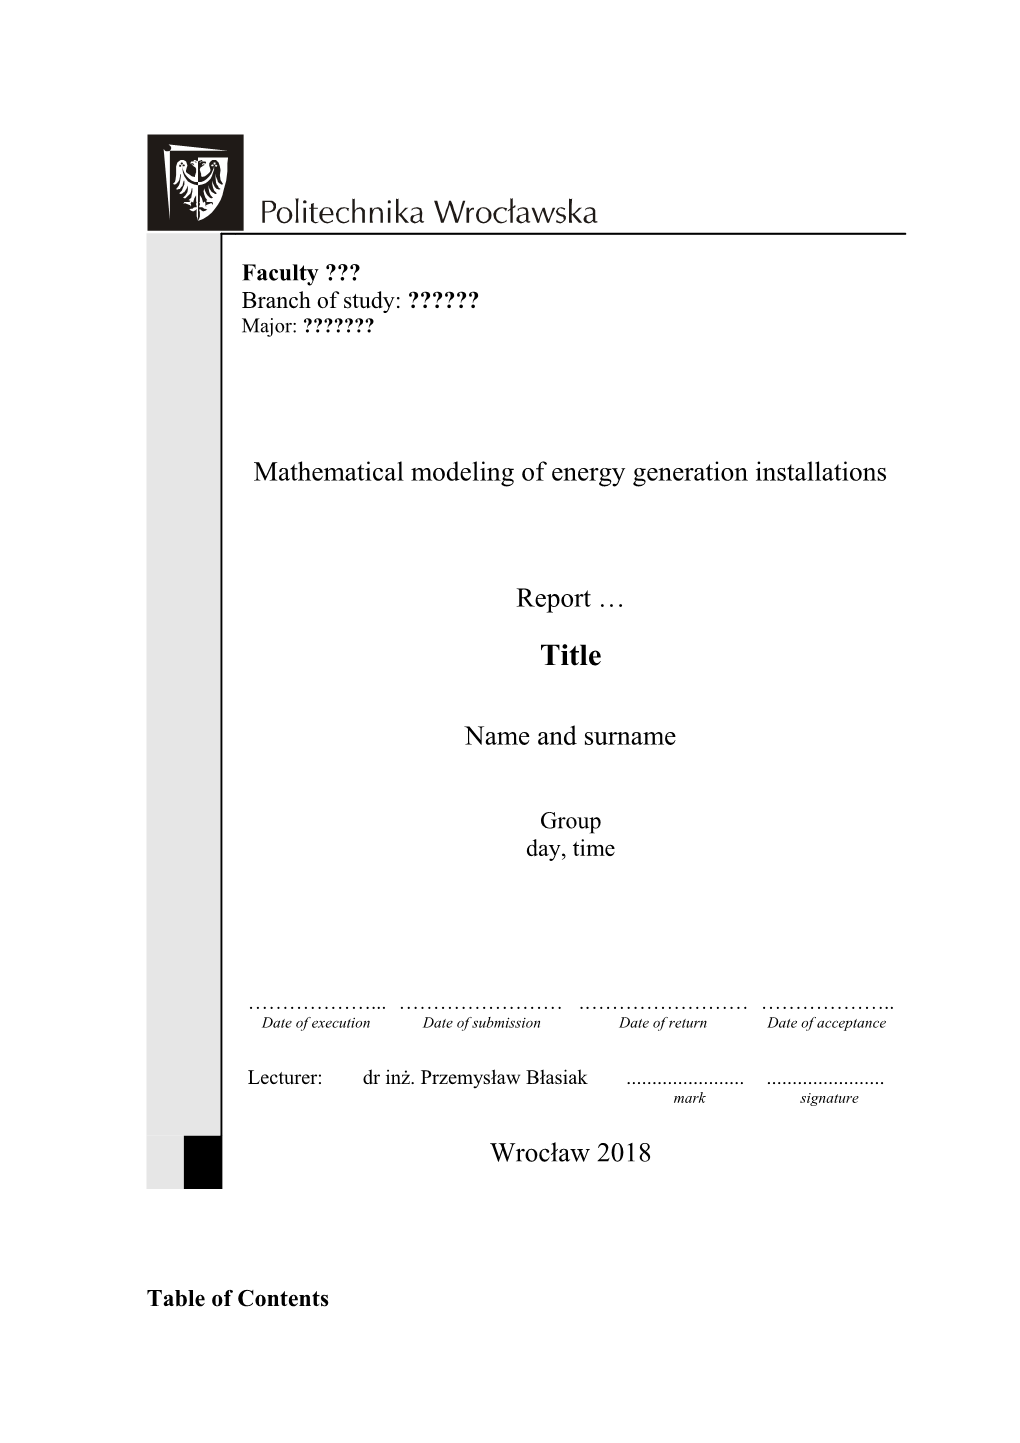 Mathematical Modeling of Energy Generation Installations